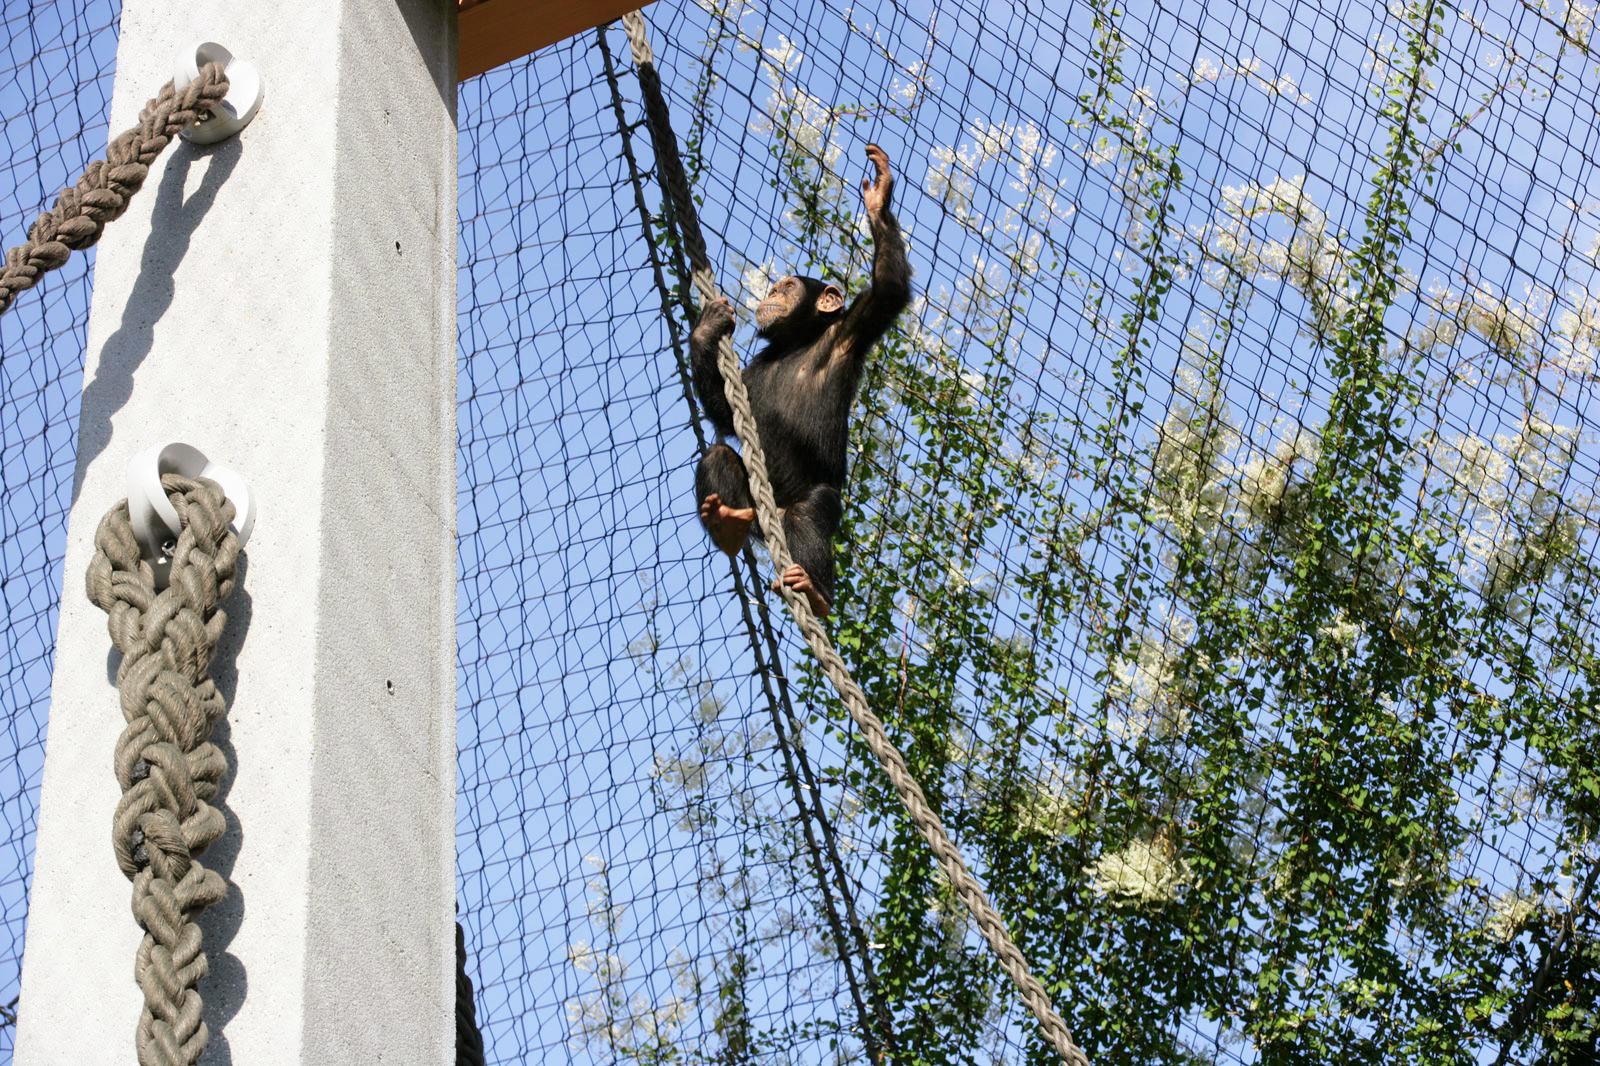 Ape playing with ropes in basel zoo